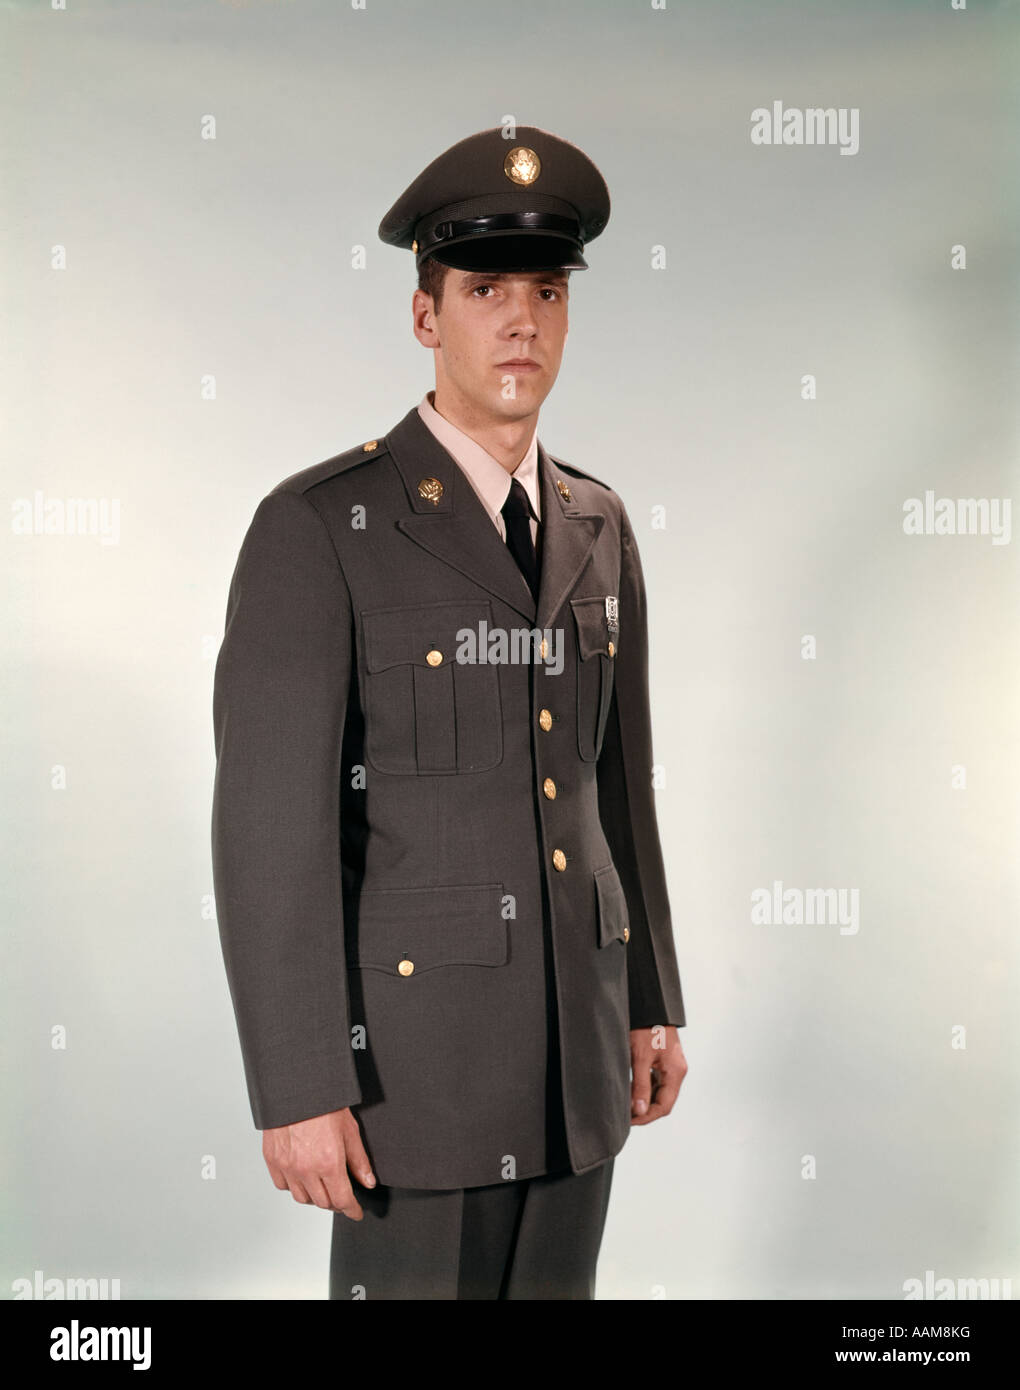 1960 1960s YOUNG MAN IN ARMY NATIONAL GUARD DRESS UNIFORM SOLDIER SOLDIERS VINTAGE PORTRAIT RETRO VINTAGE Stock Photo